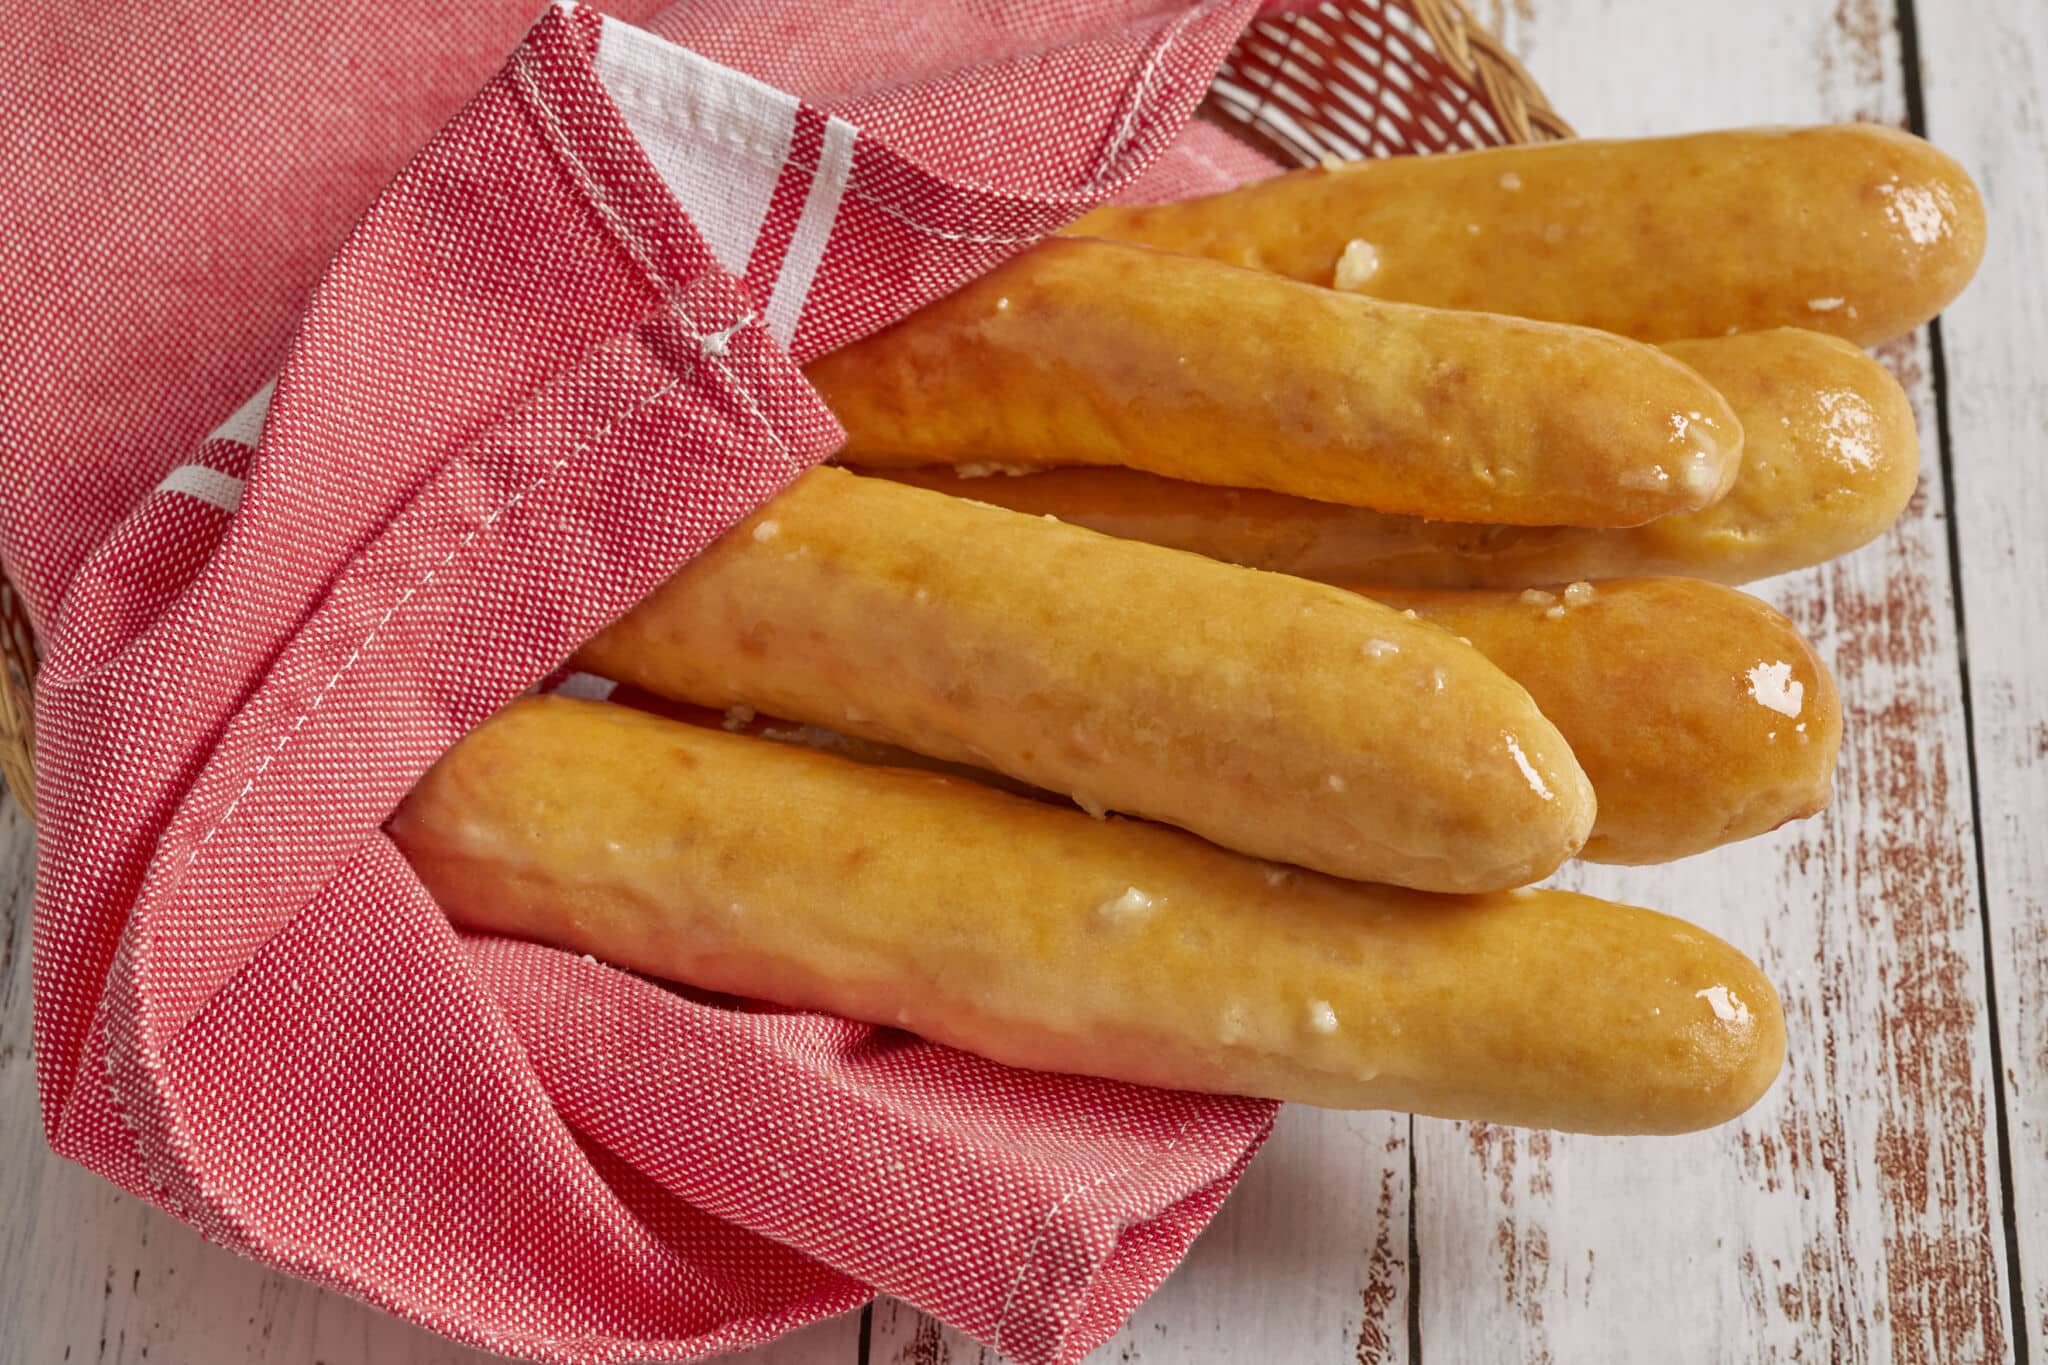 Baked golden breadsticks covered with rich garlic butter, wrapped with towel in a serving basket.